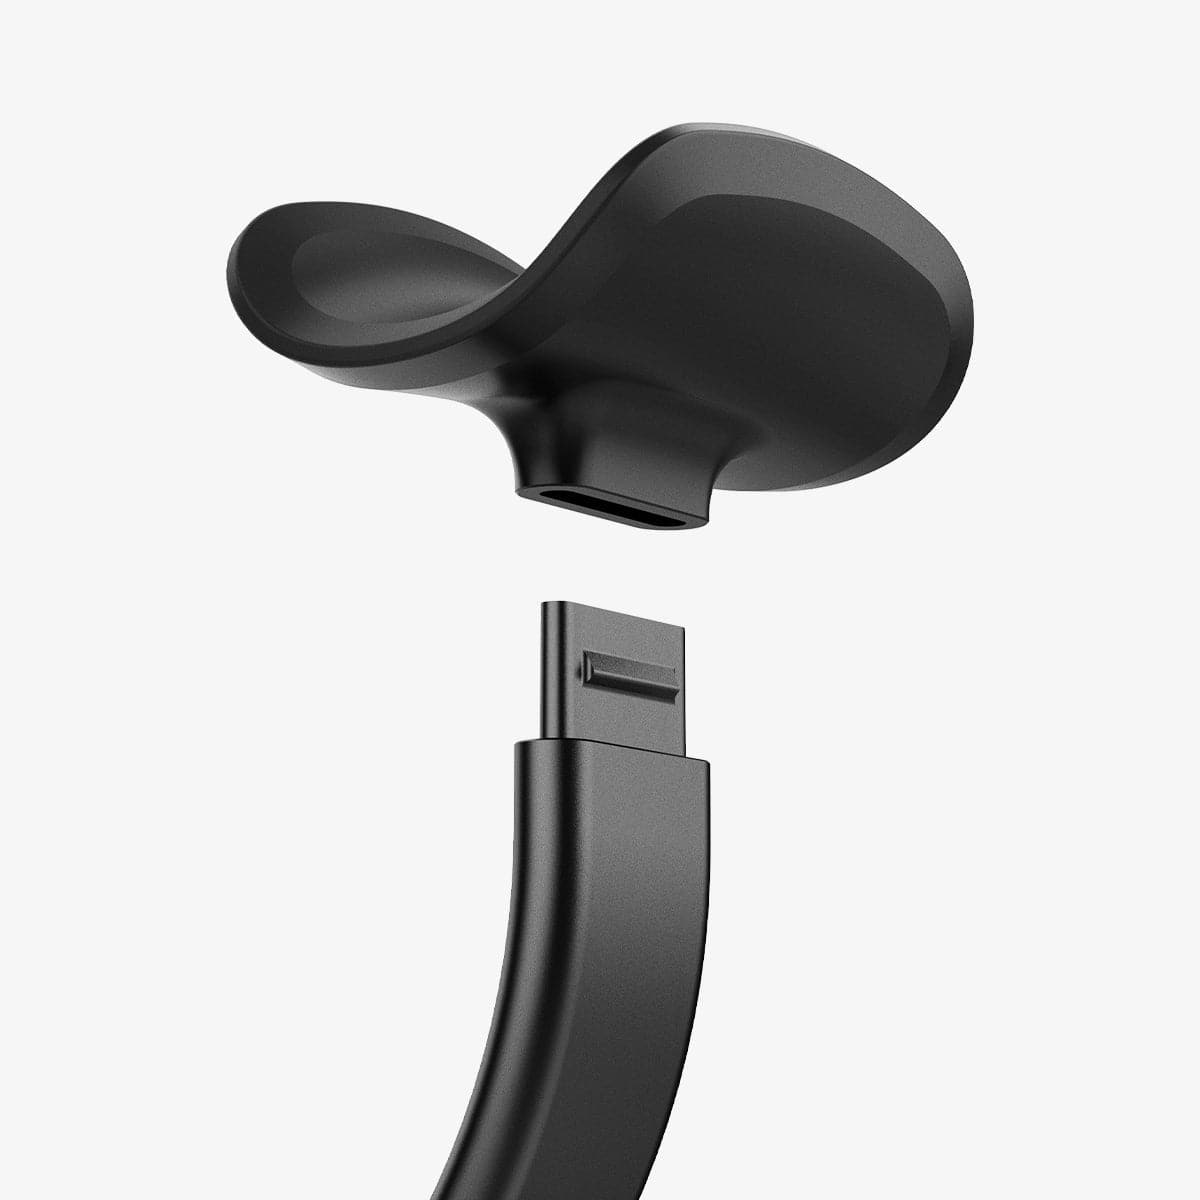 AMP02818 - Apple Airpods Max MagFit Stand in black showing the top stand portion hovering above remainder of stand